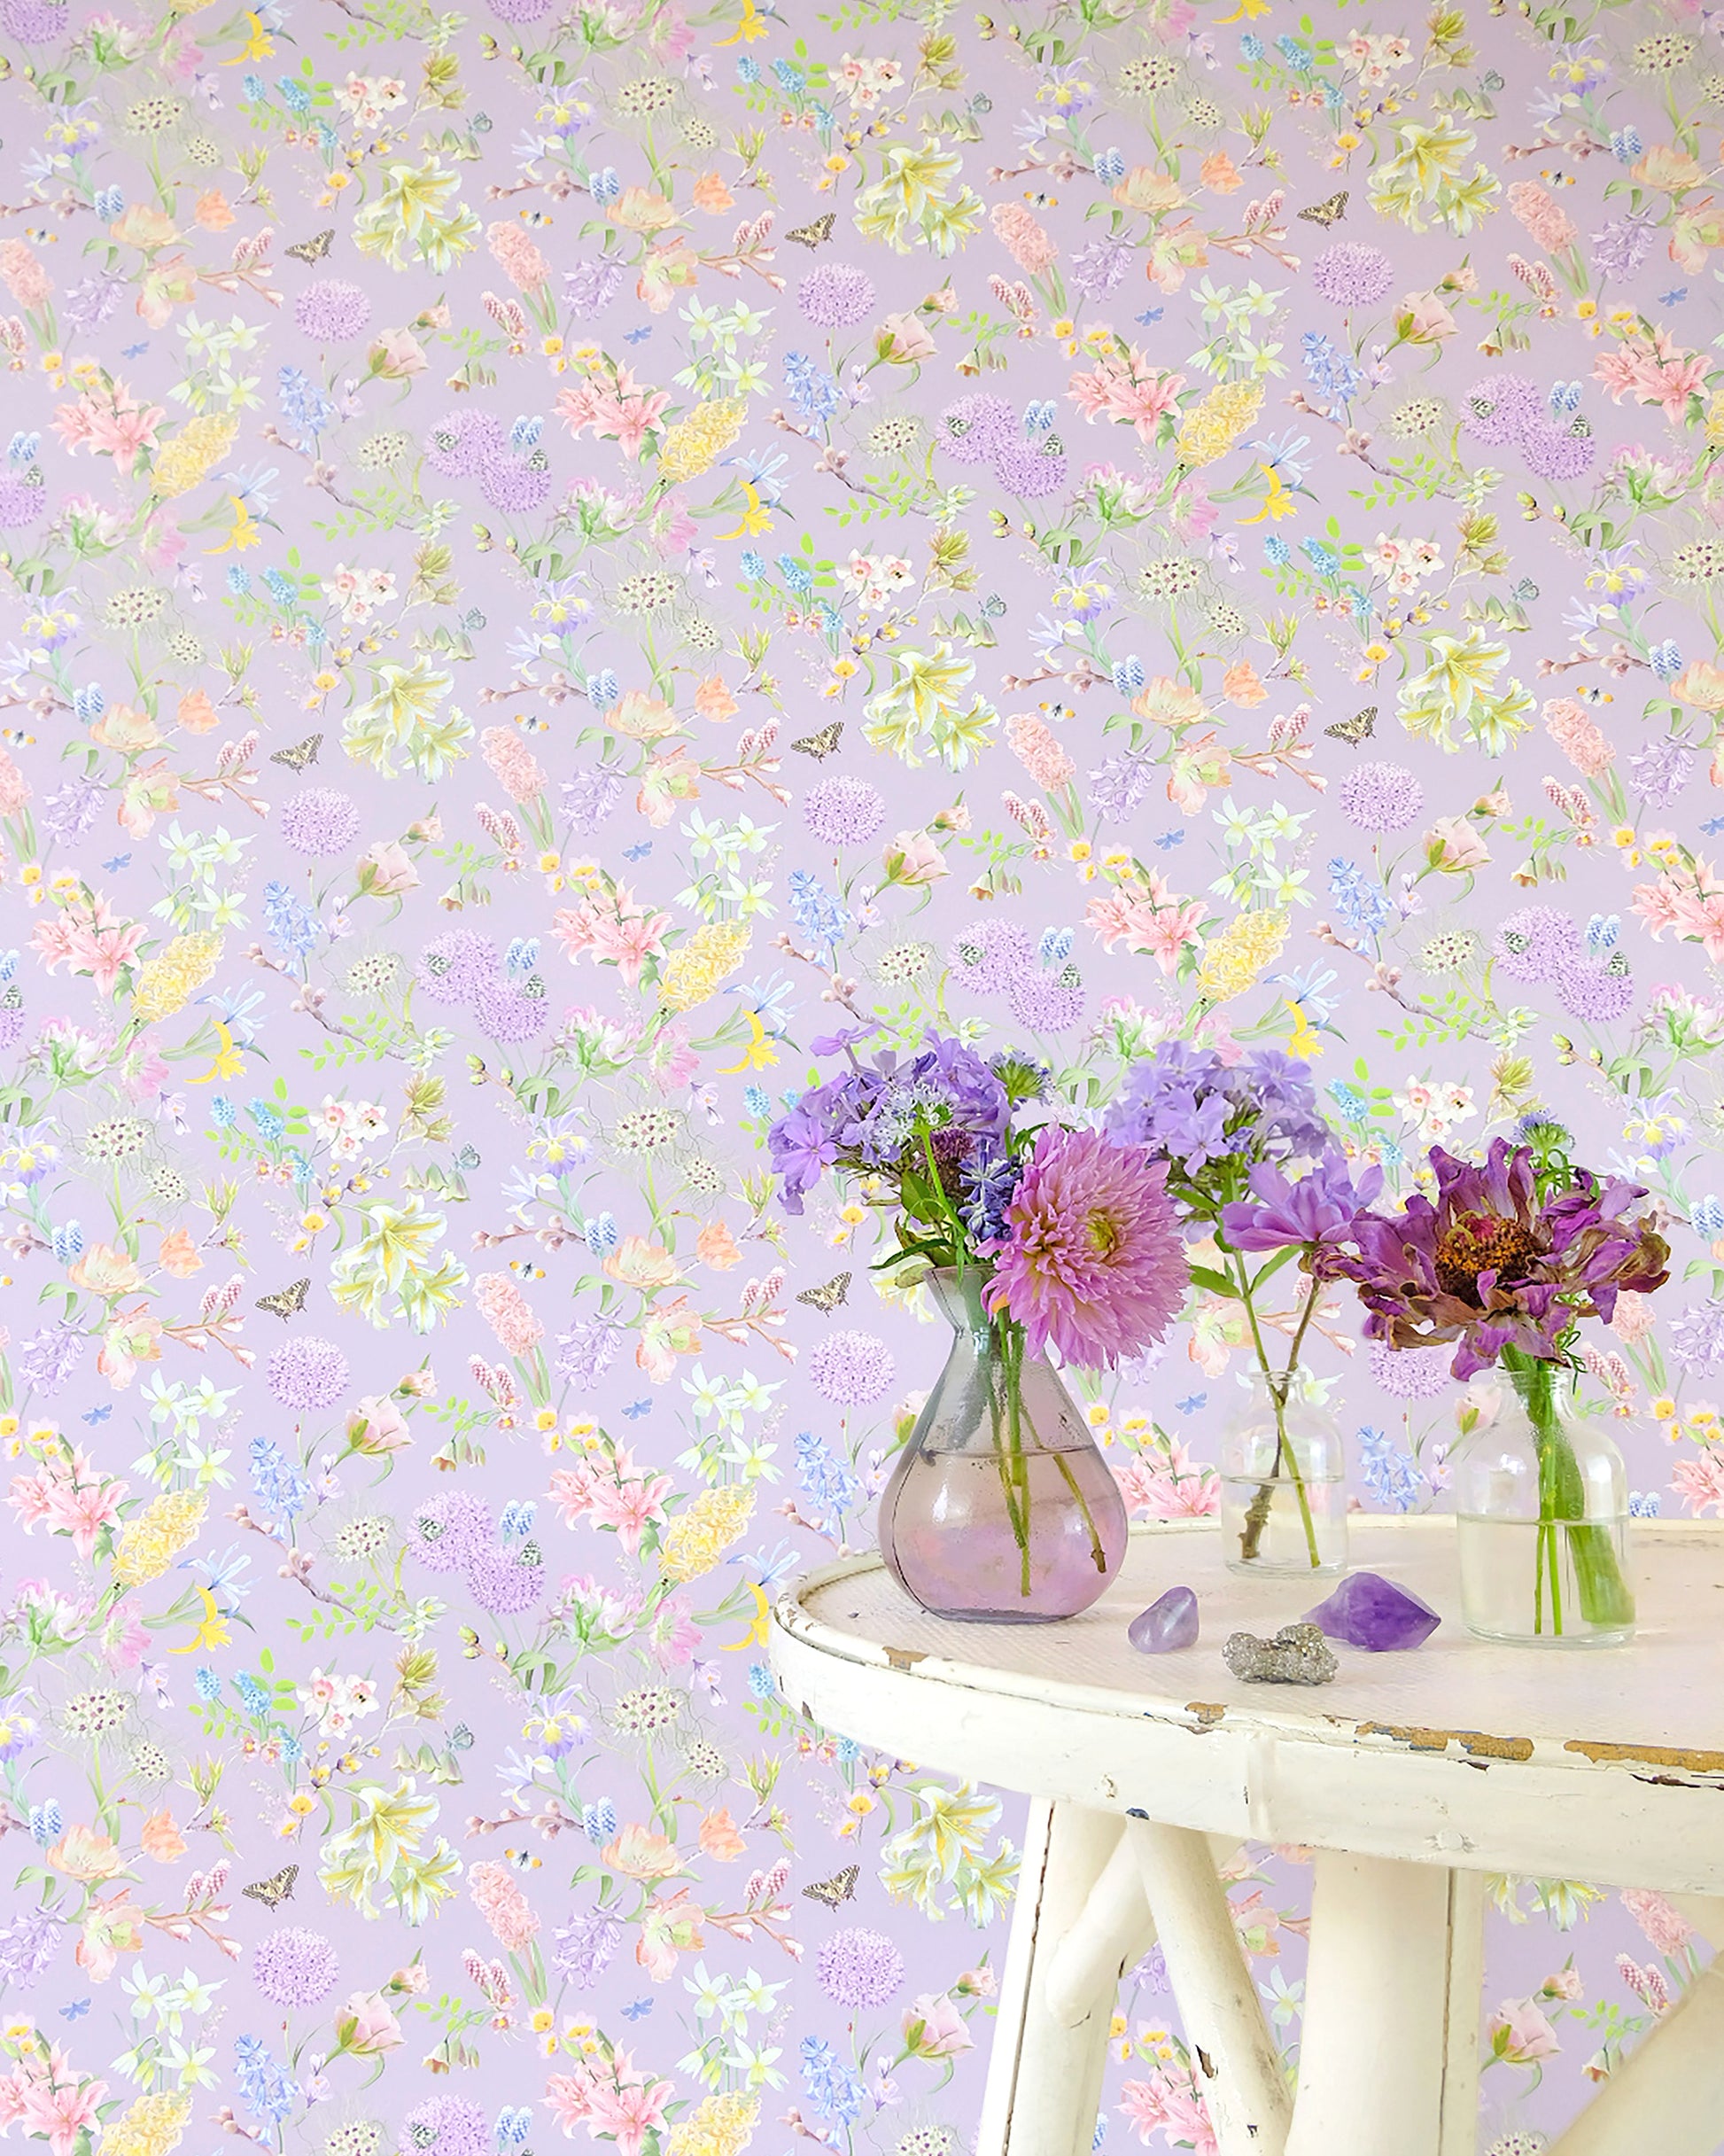 Pastel lilac wallpaper in baby blue with a delicate floral pattern for traditional cottage interiors